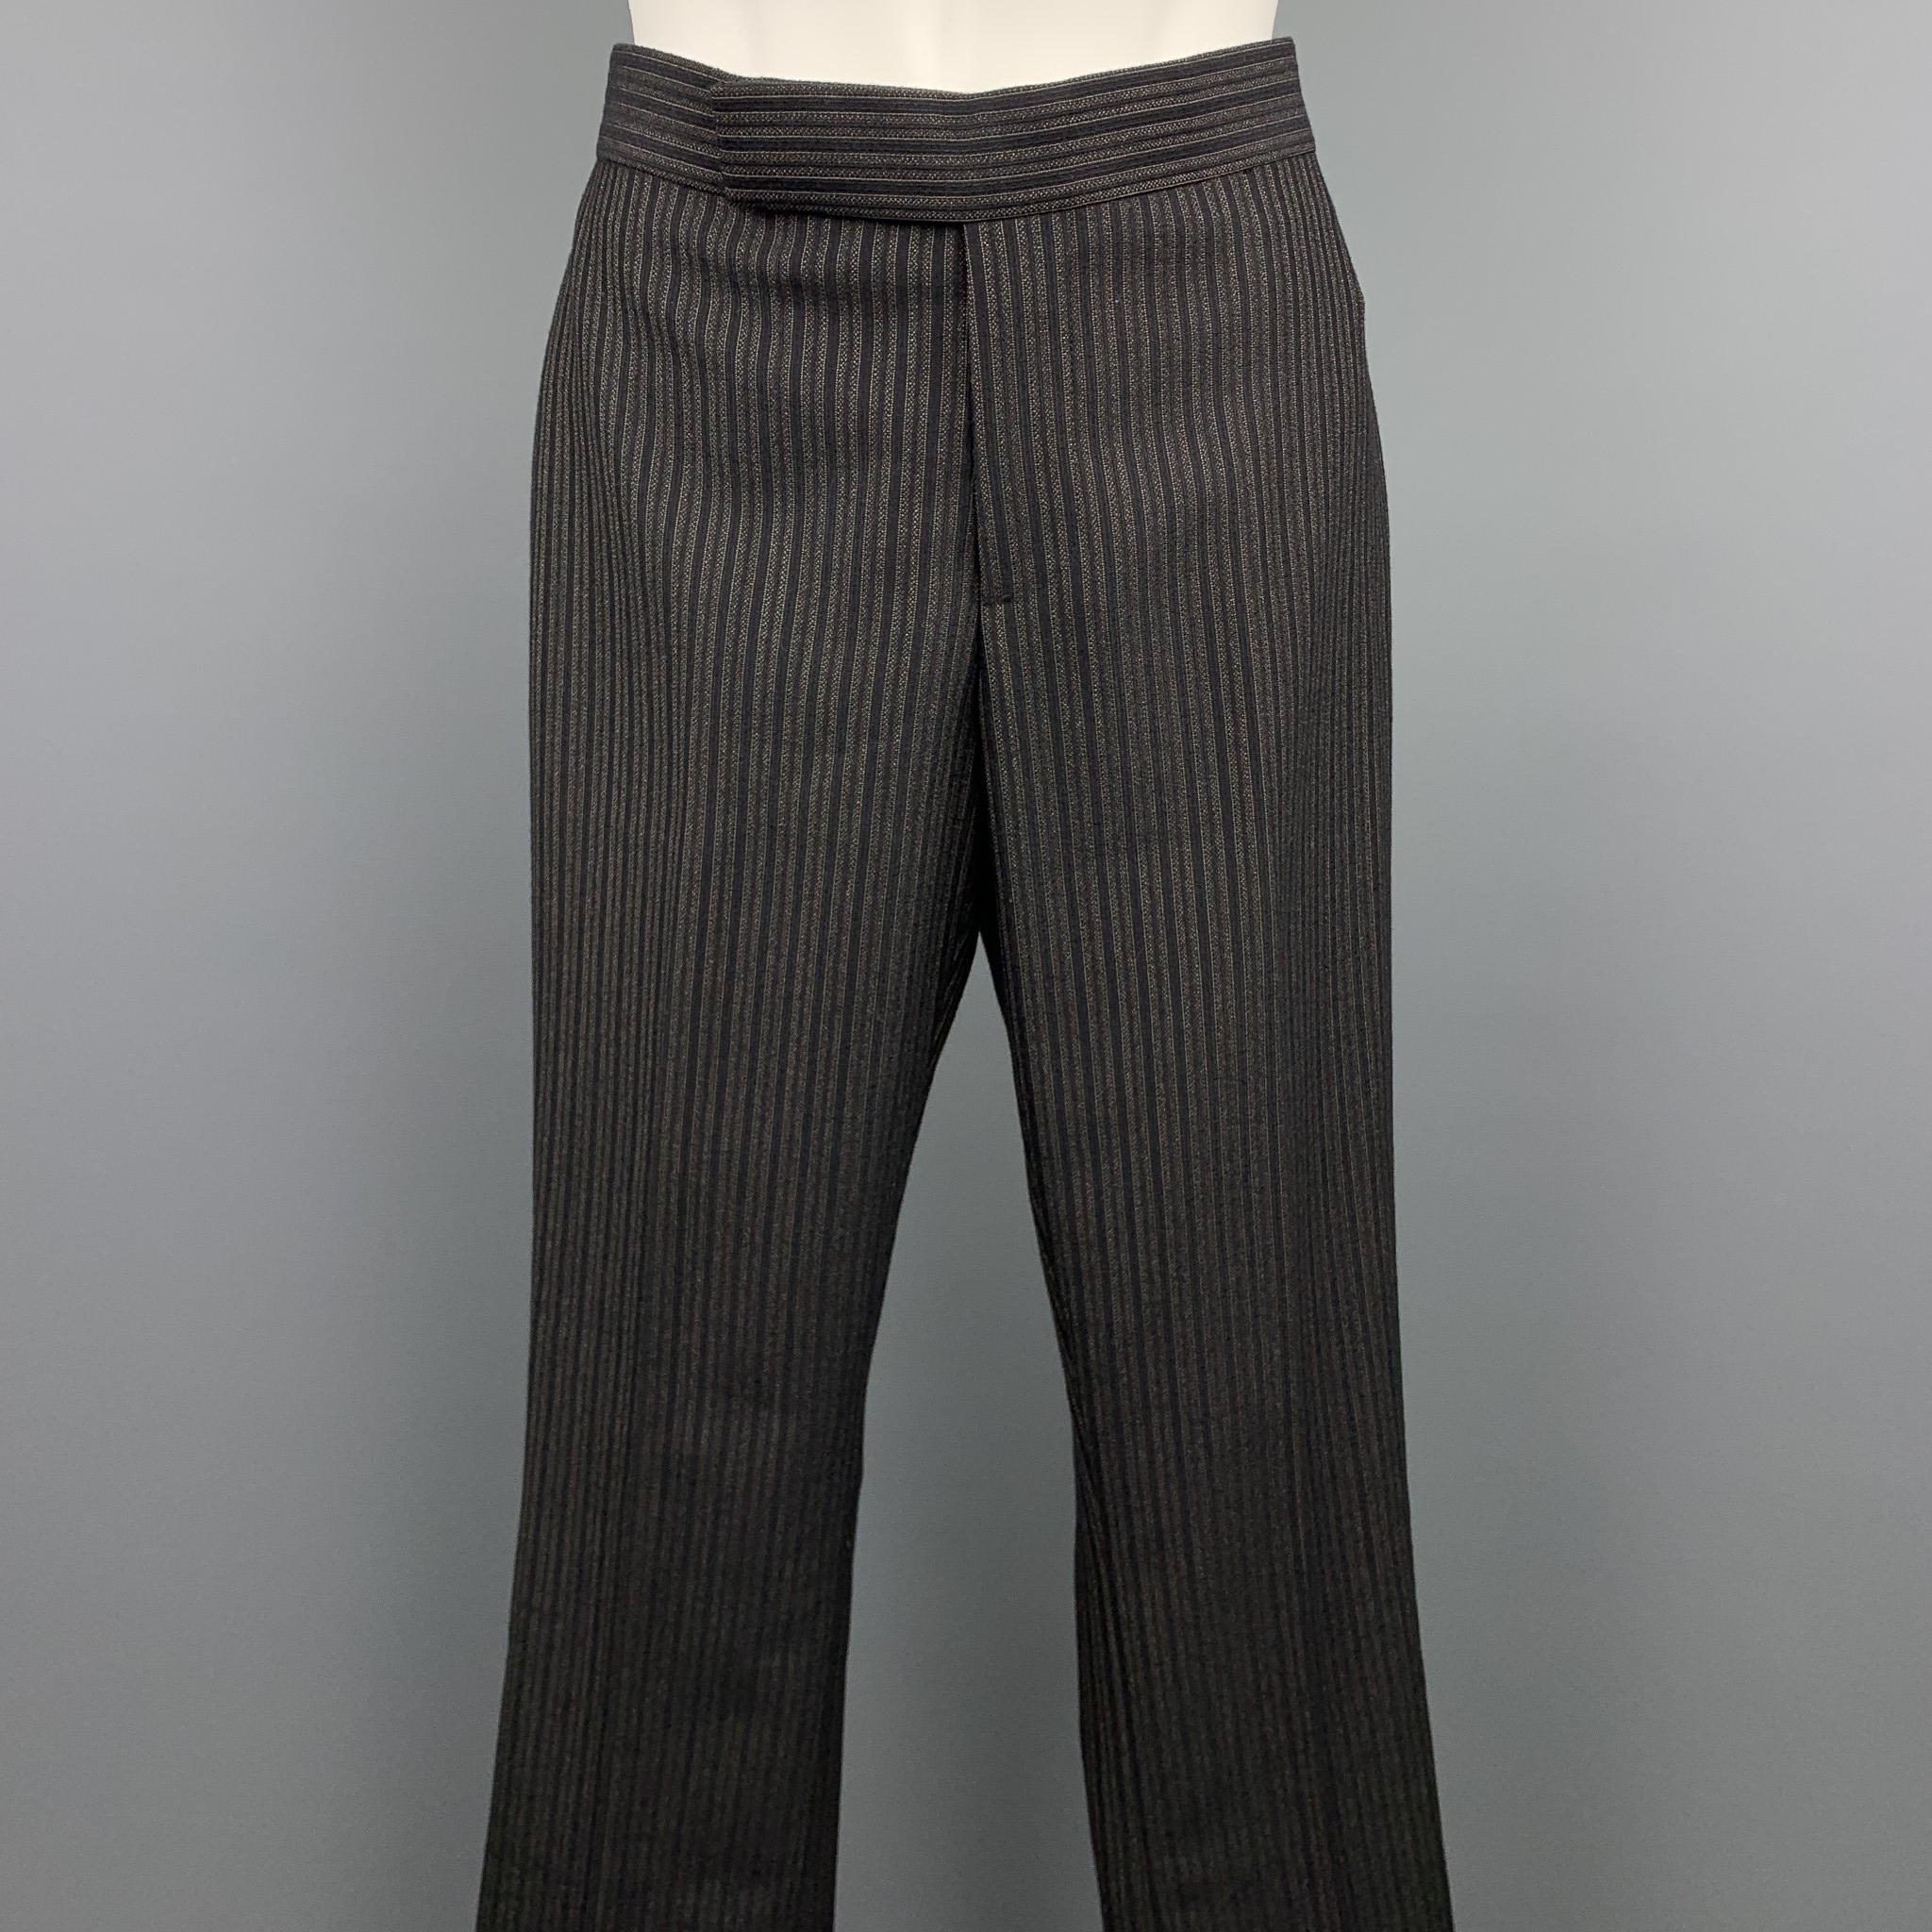 RALPH LAUREN COLLECTION dress pants comes in a black & grey striped wool featuring a straight leg, front tab, and a zip fly closure. Made in USA.

Excellent Pre-Owned Condition.
Marked: US 2

Measurements:

Waist: 27 in. 
Rise: 7 in. 
Inseam: 31 in.